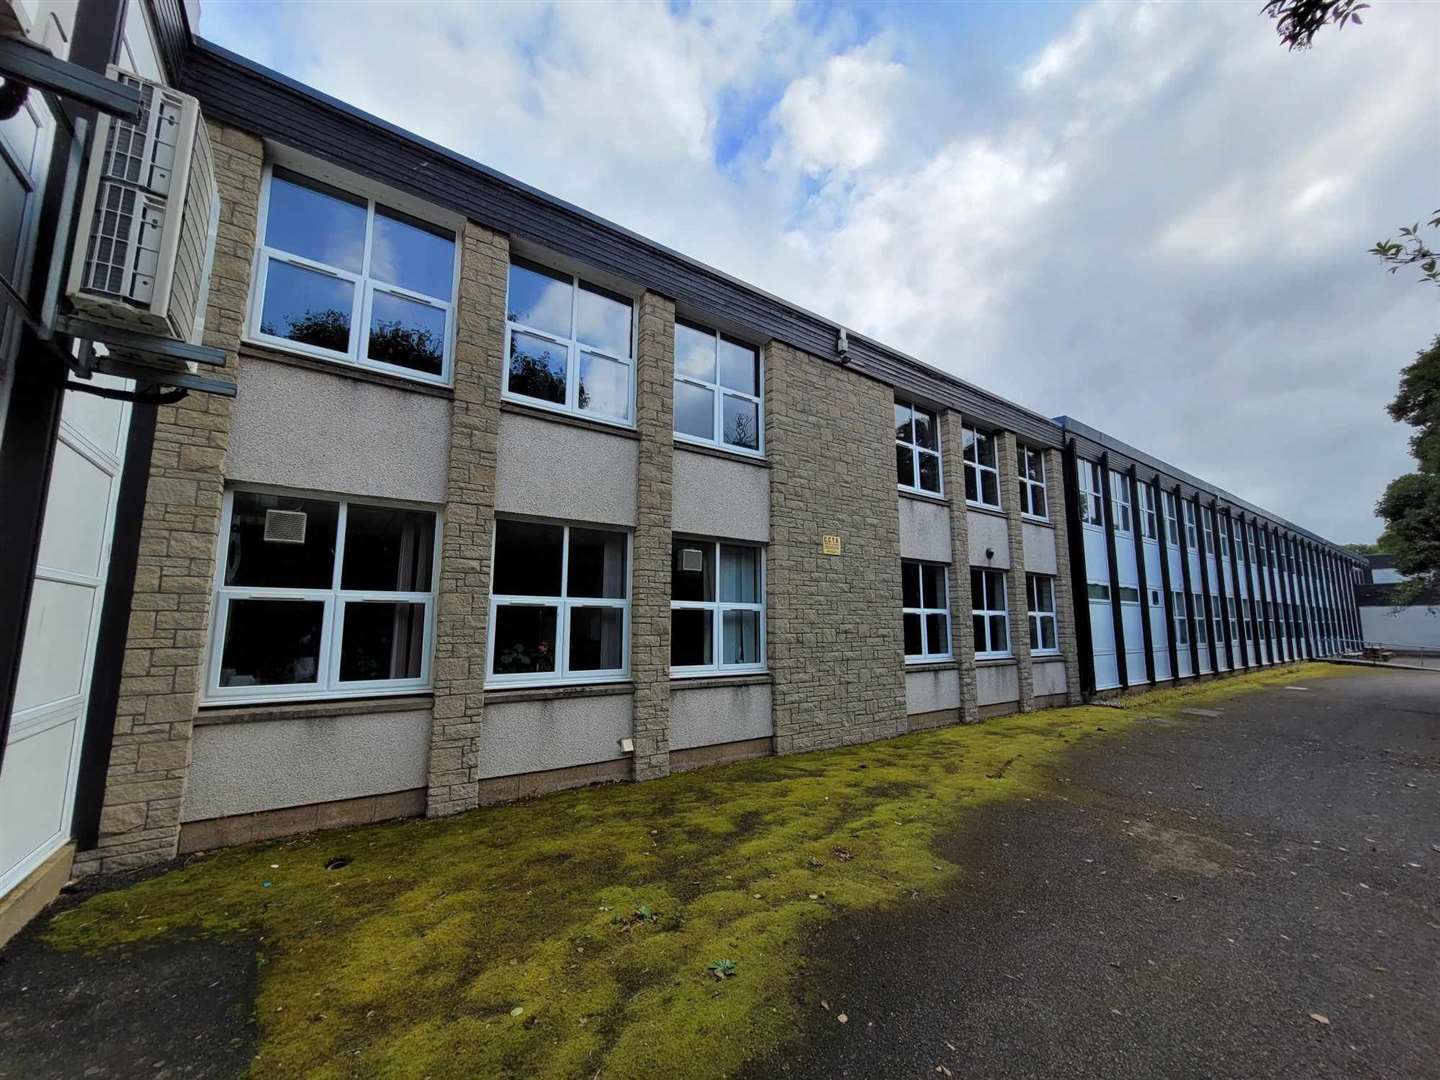 Forres Academy.